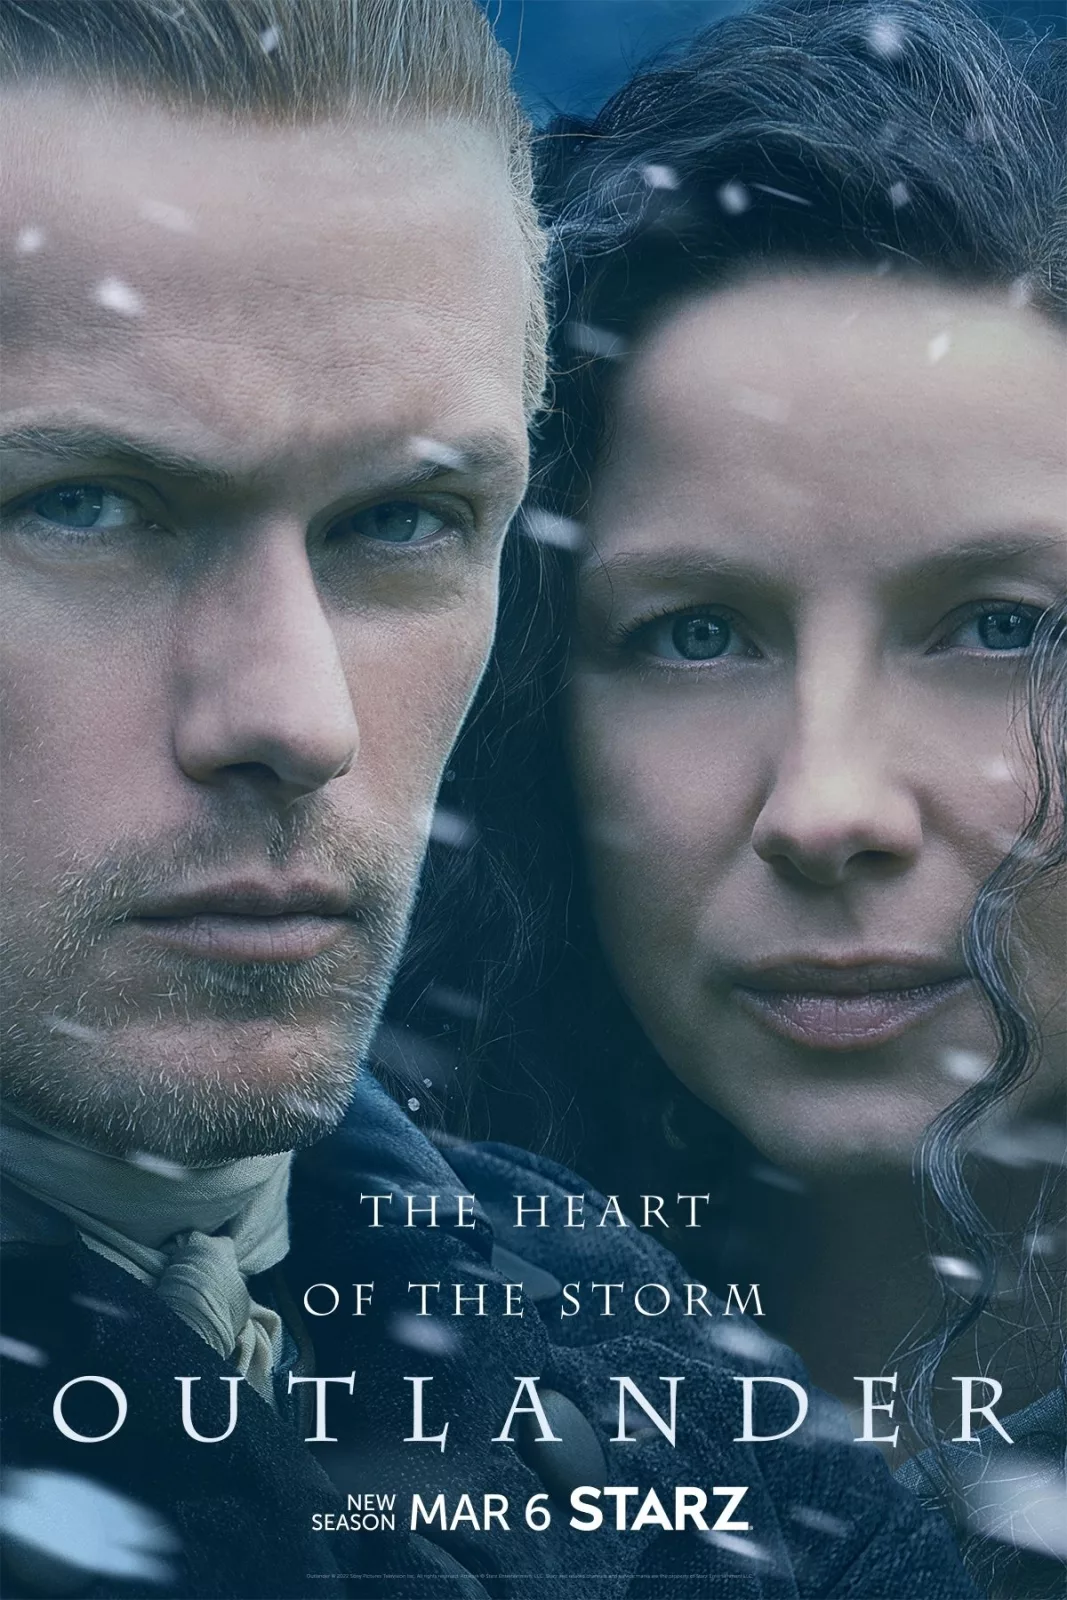 Outlander gets a new season 6 trailer and poster